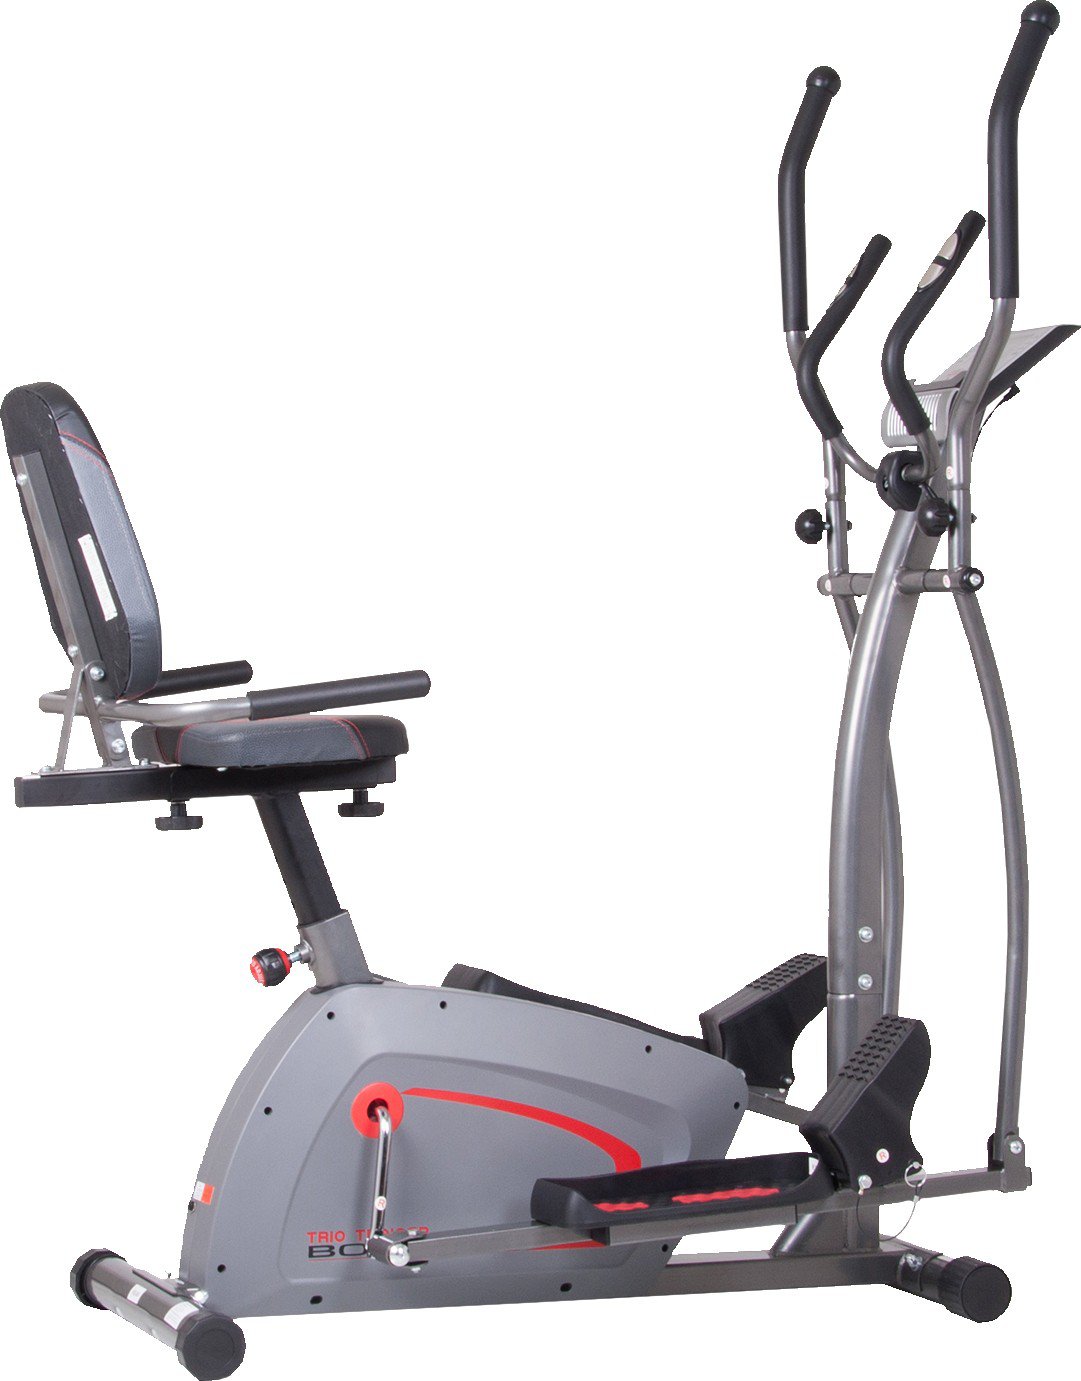 What are the Elliptical machines?